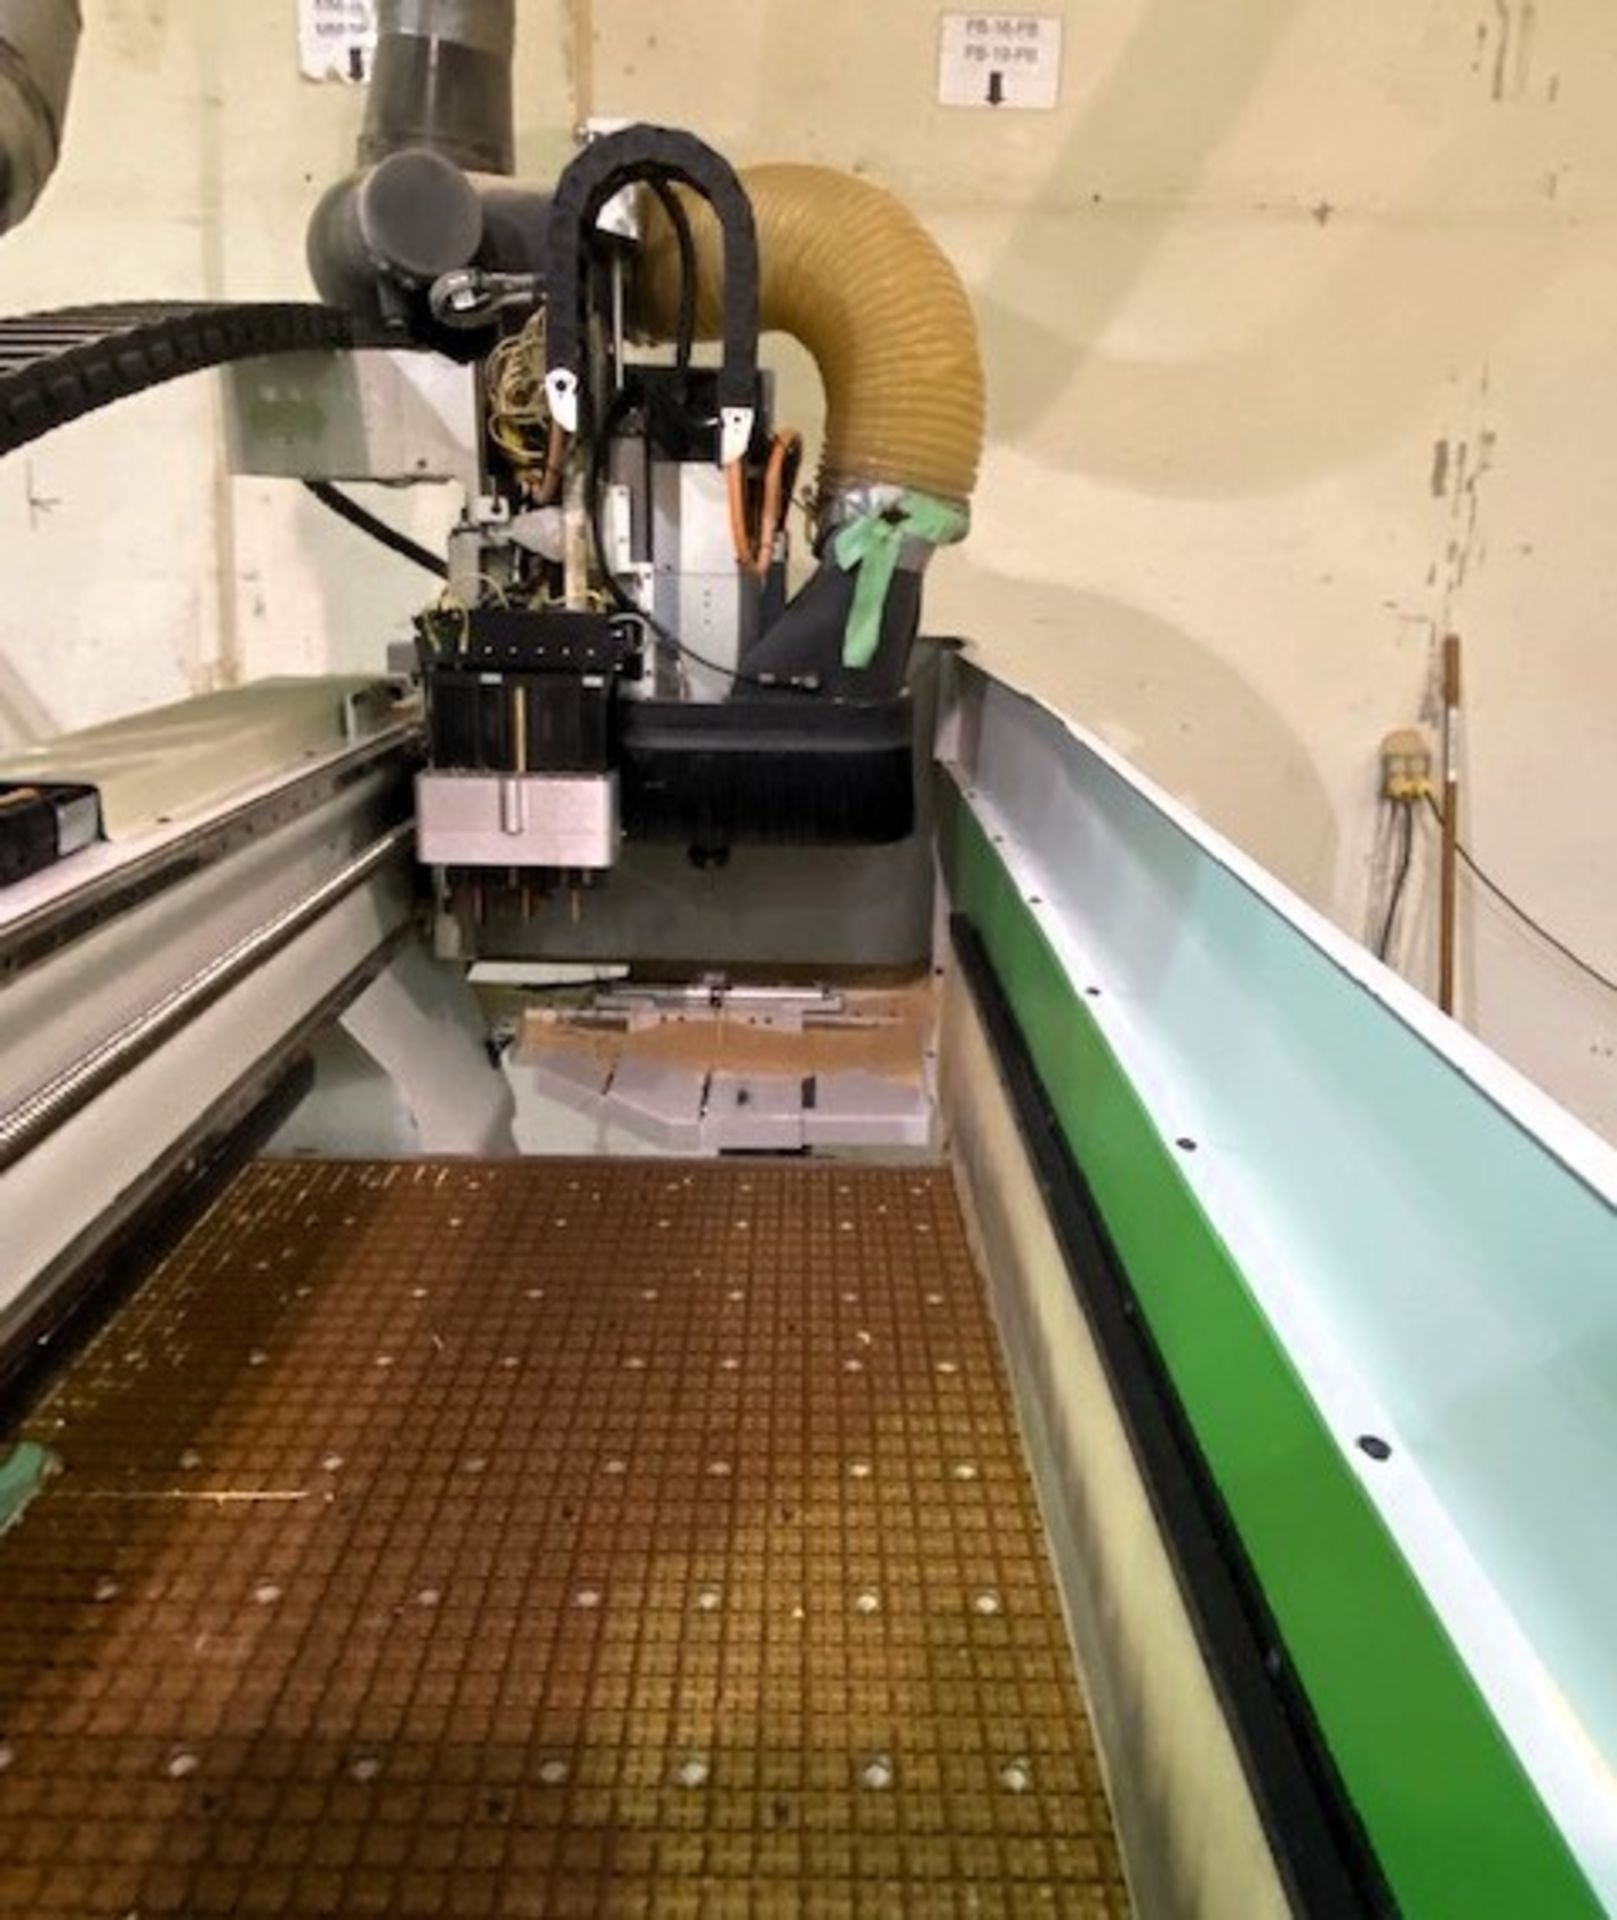 2008 BIESSE ROVER A3.4L CNC ROUTER, 4' X 12' NESTED TABLE, 230V, S/N 33781 - Image 2 of 15